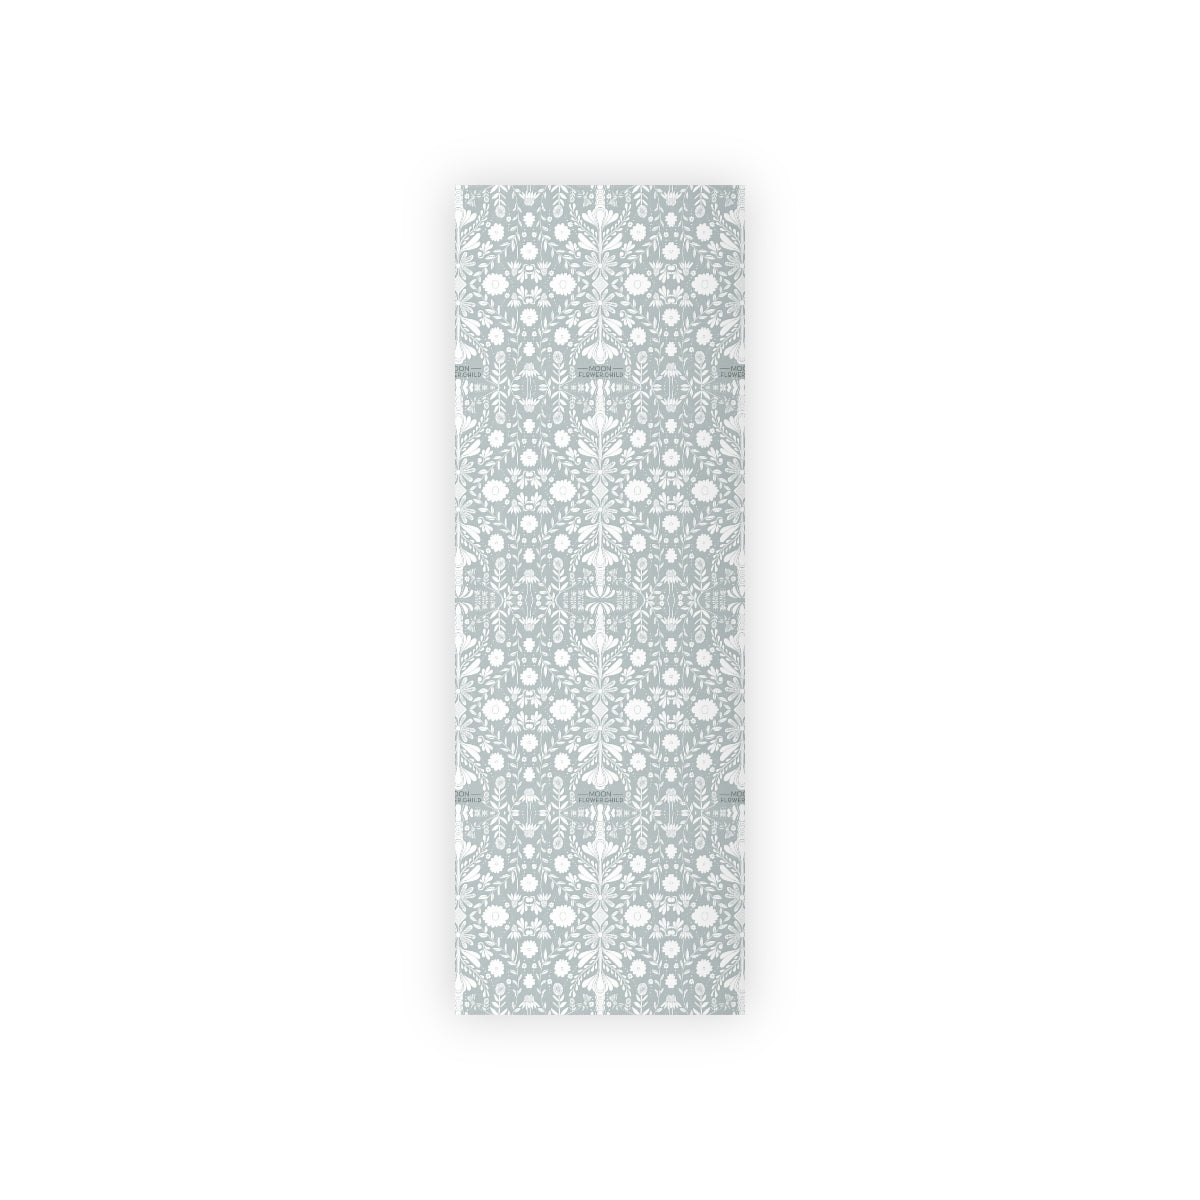 Gift Wrapping Paper Roll [Air]